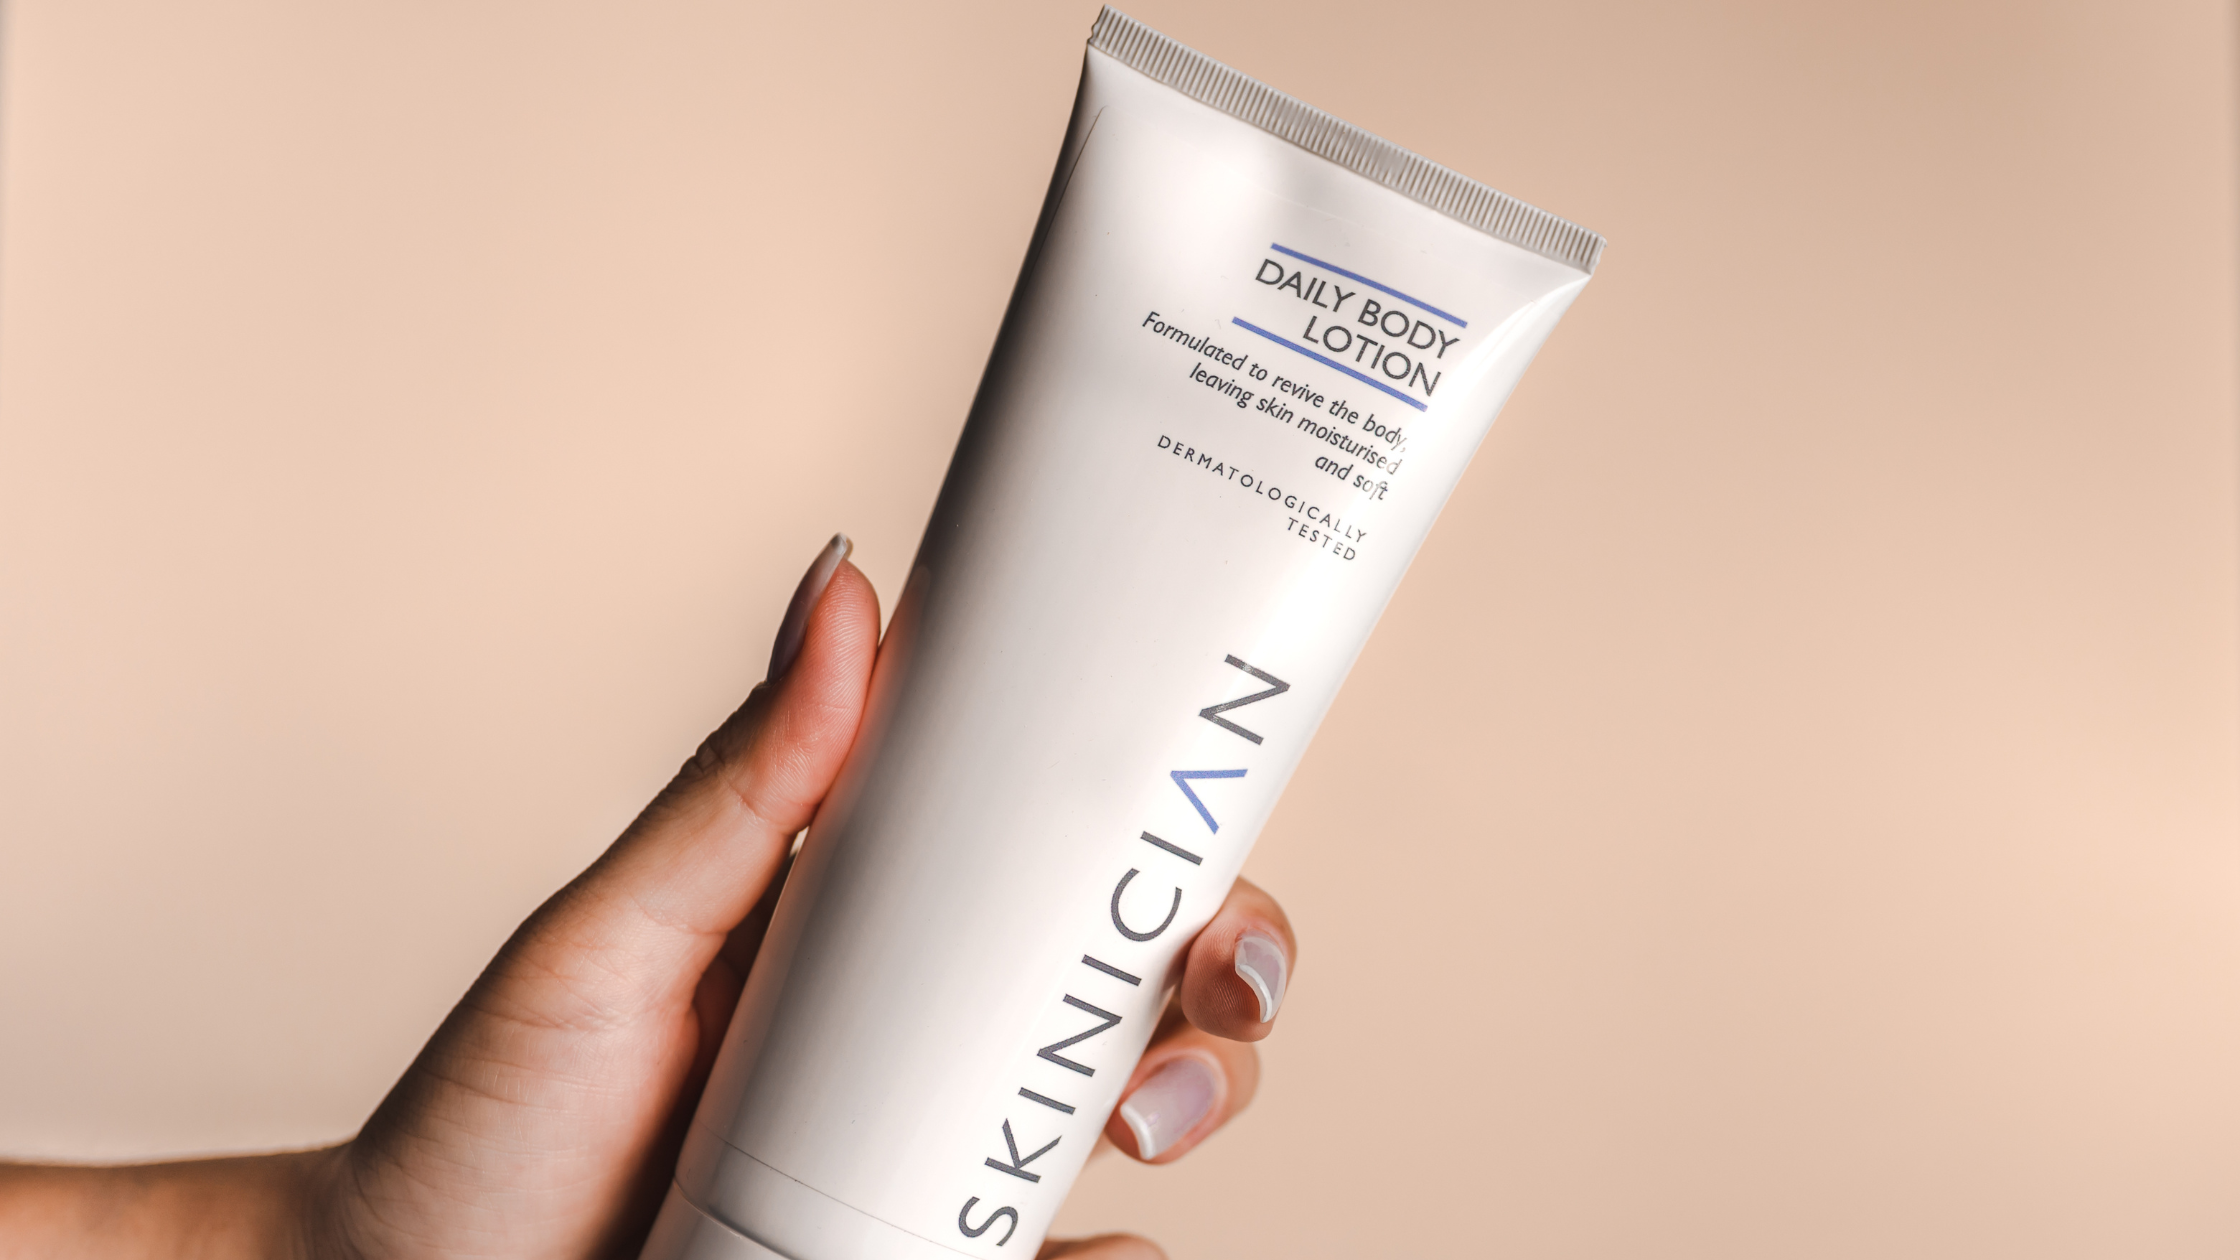 A bottle of SKINICIAN Daily Body Lotion, a lotion ideal for caring for menopausal skin, held in a hand against a neutral background.